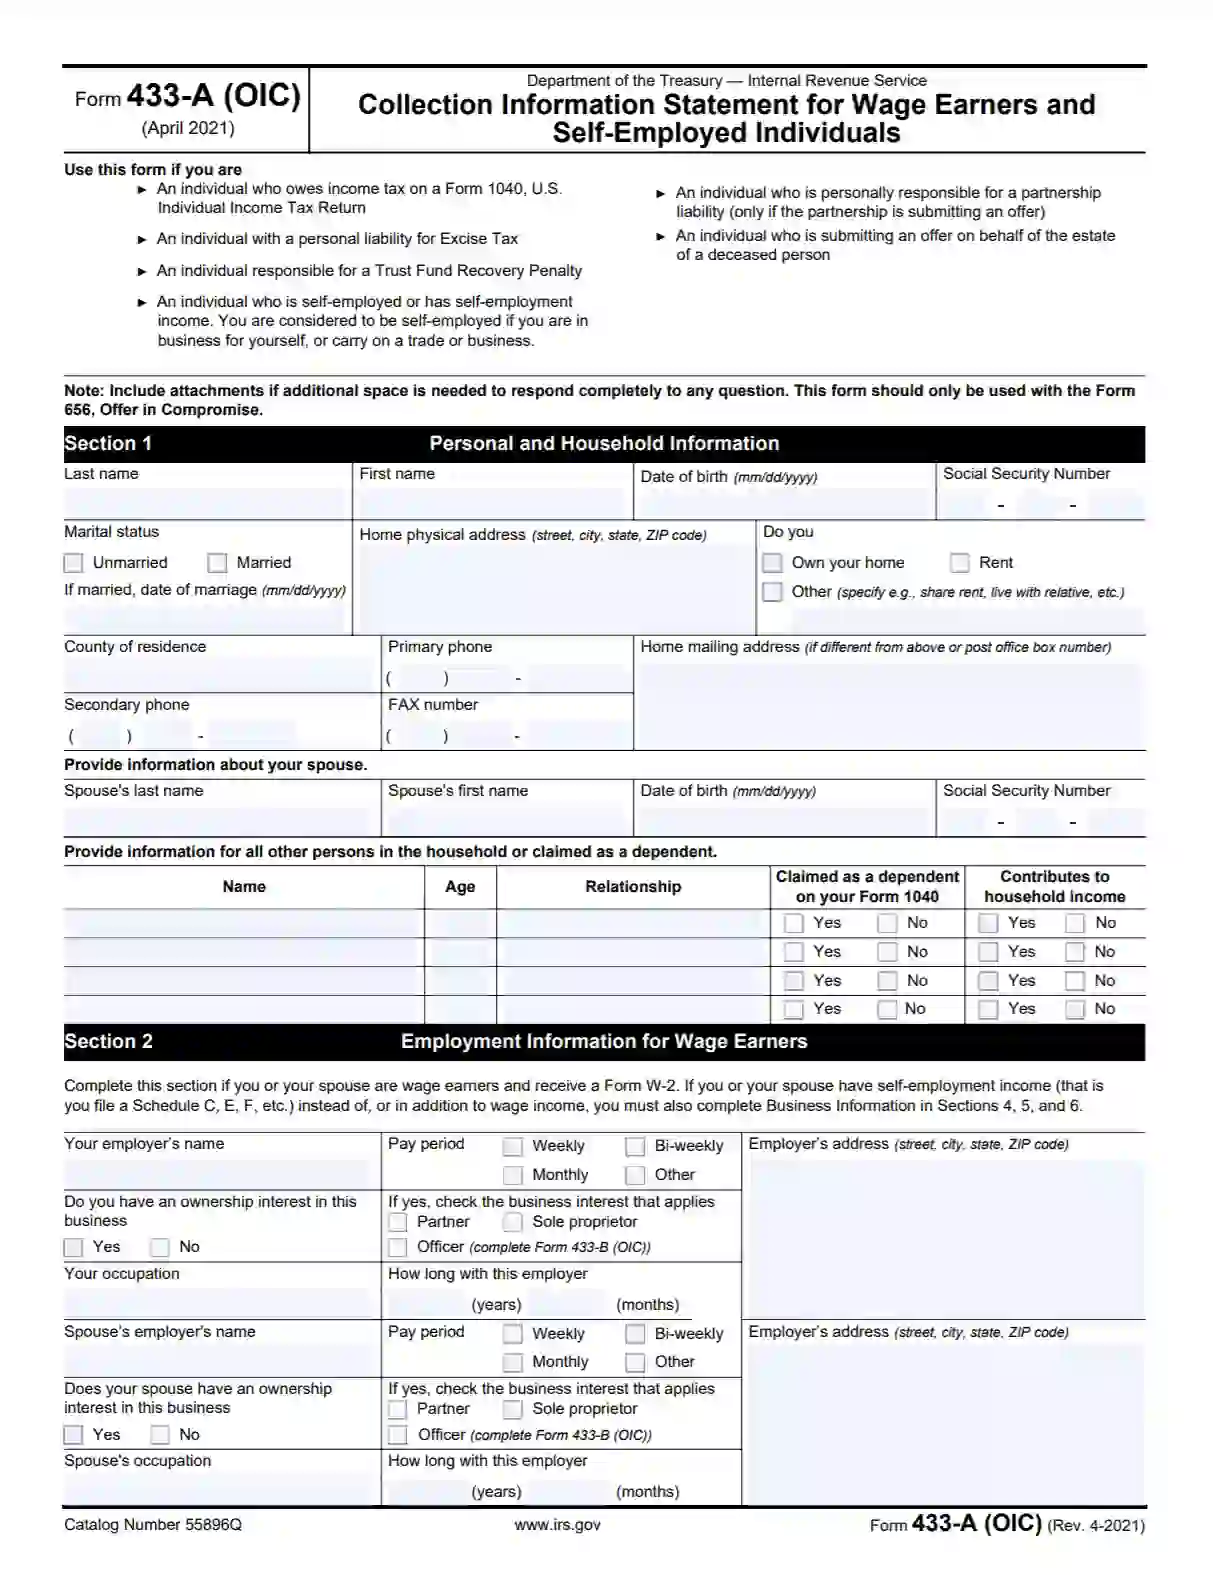 irs form 433 a (oic) rev 04 2021